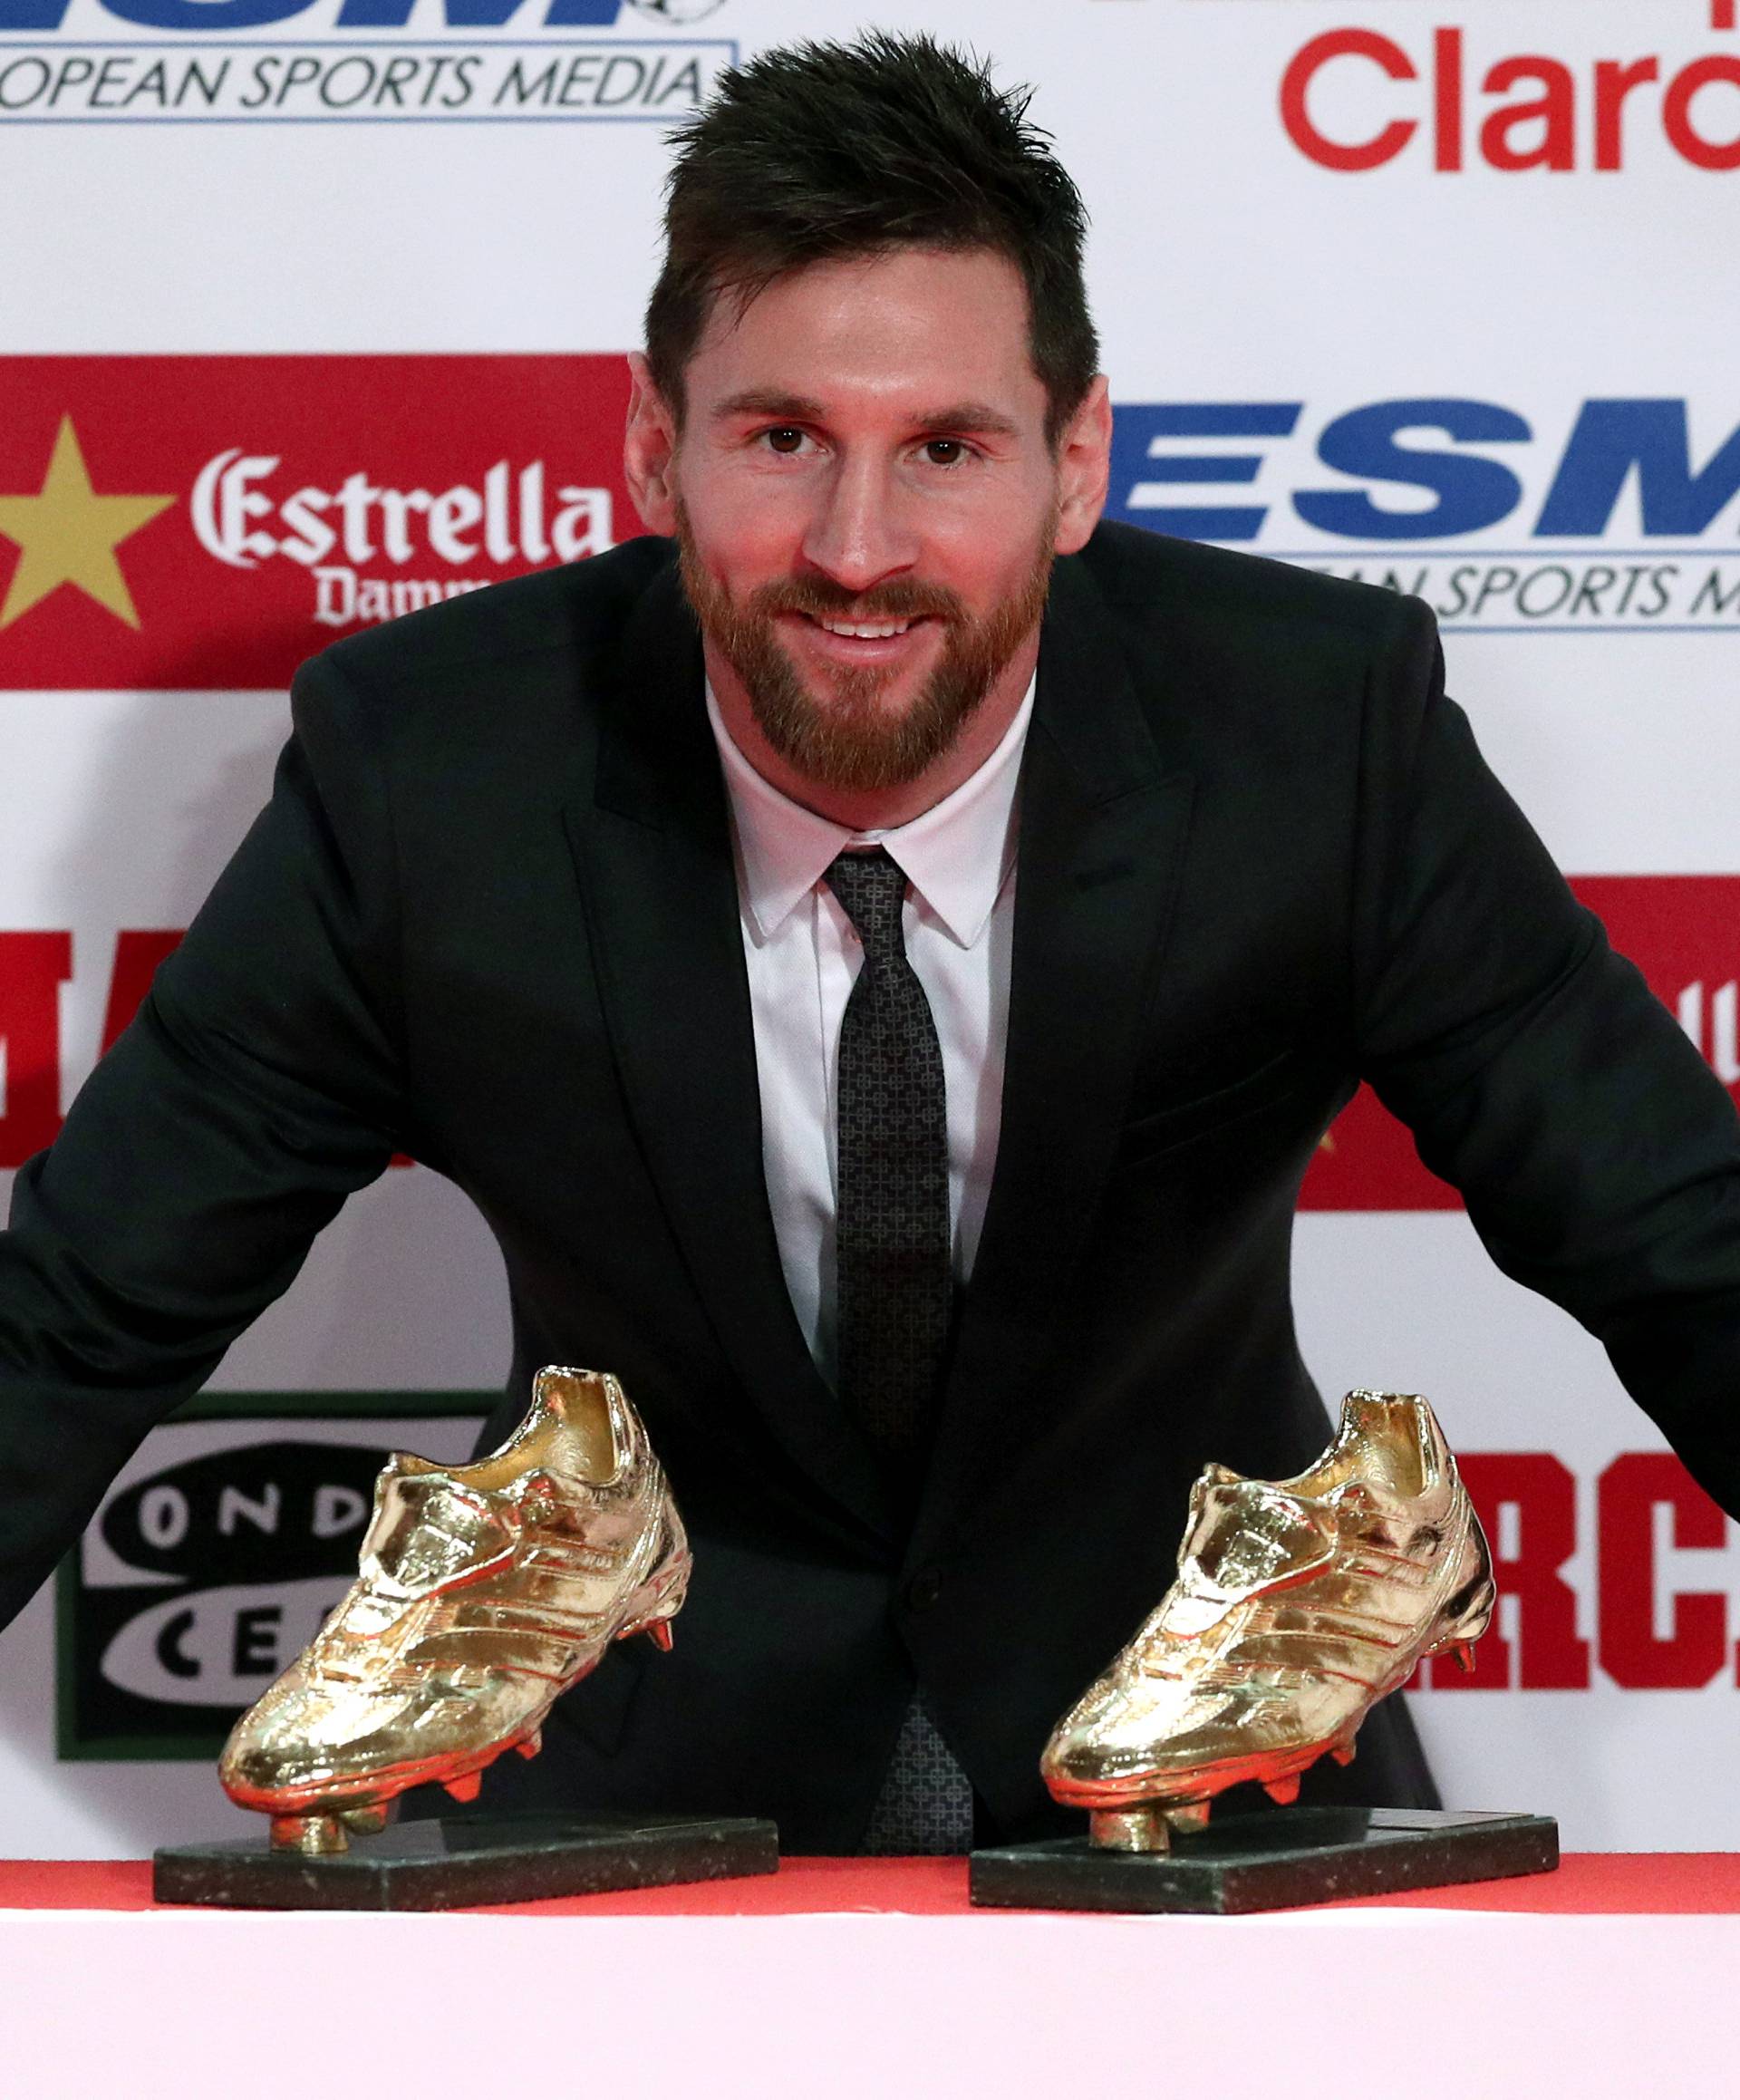 Barcelona's Lionel Messi poses with his four Golden Boot trophies during a ceremony in Barcelona